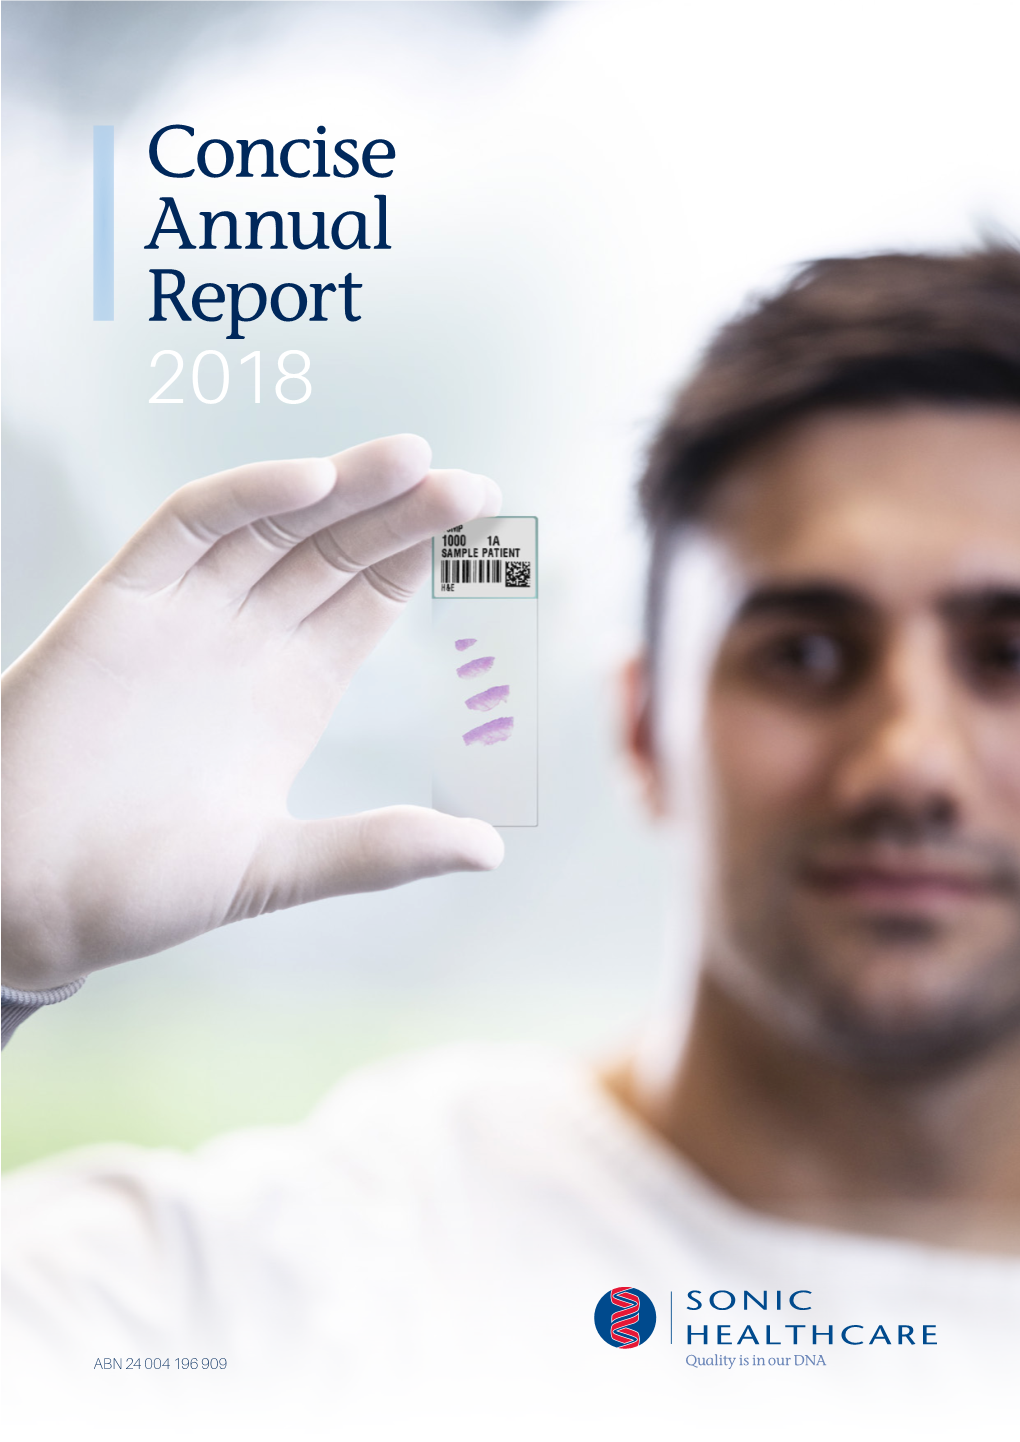 Concise Annual Report 2018